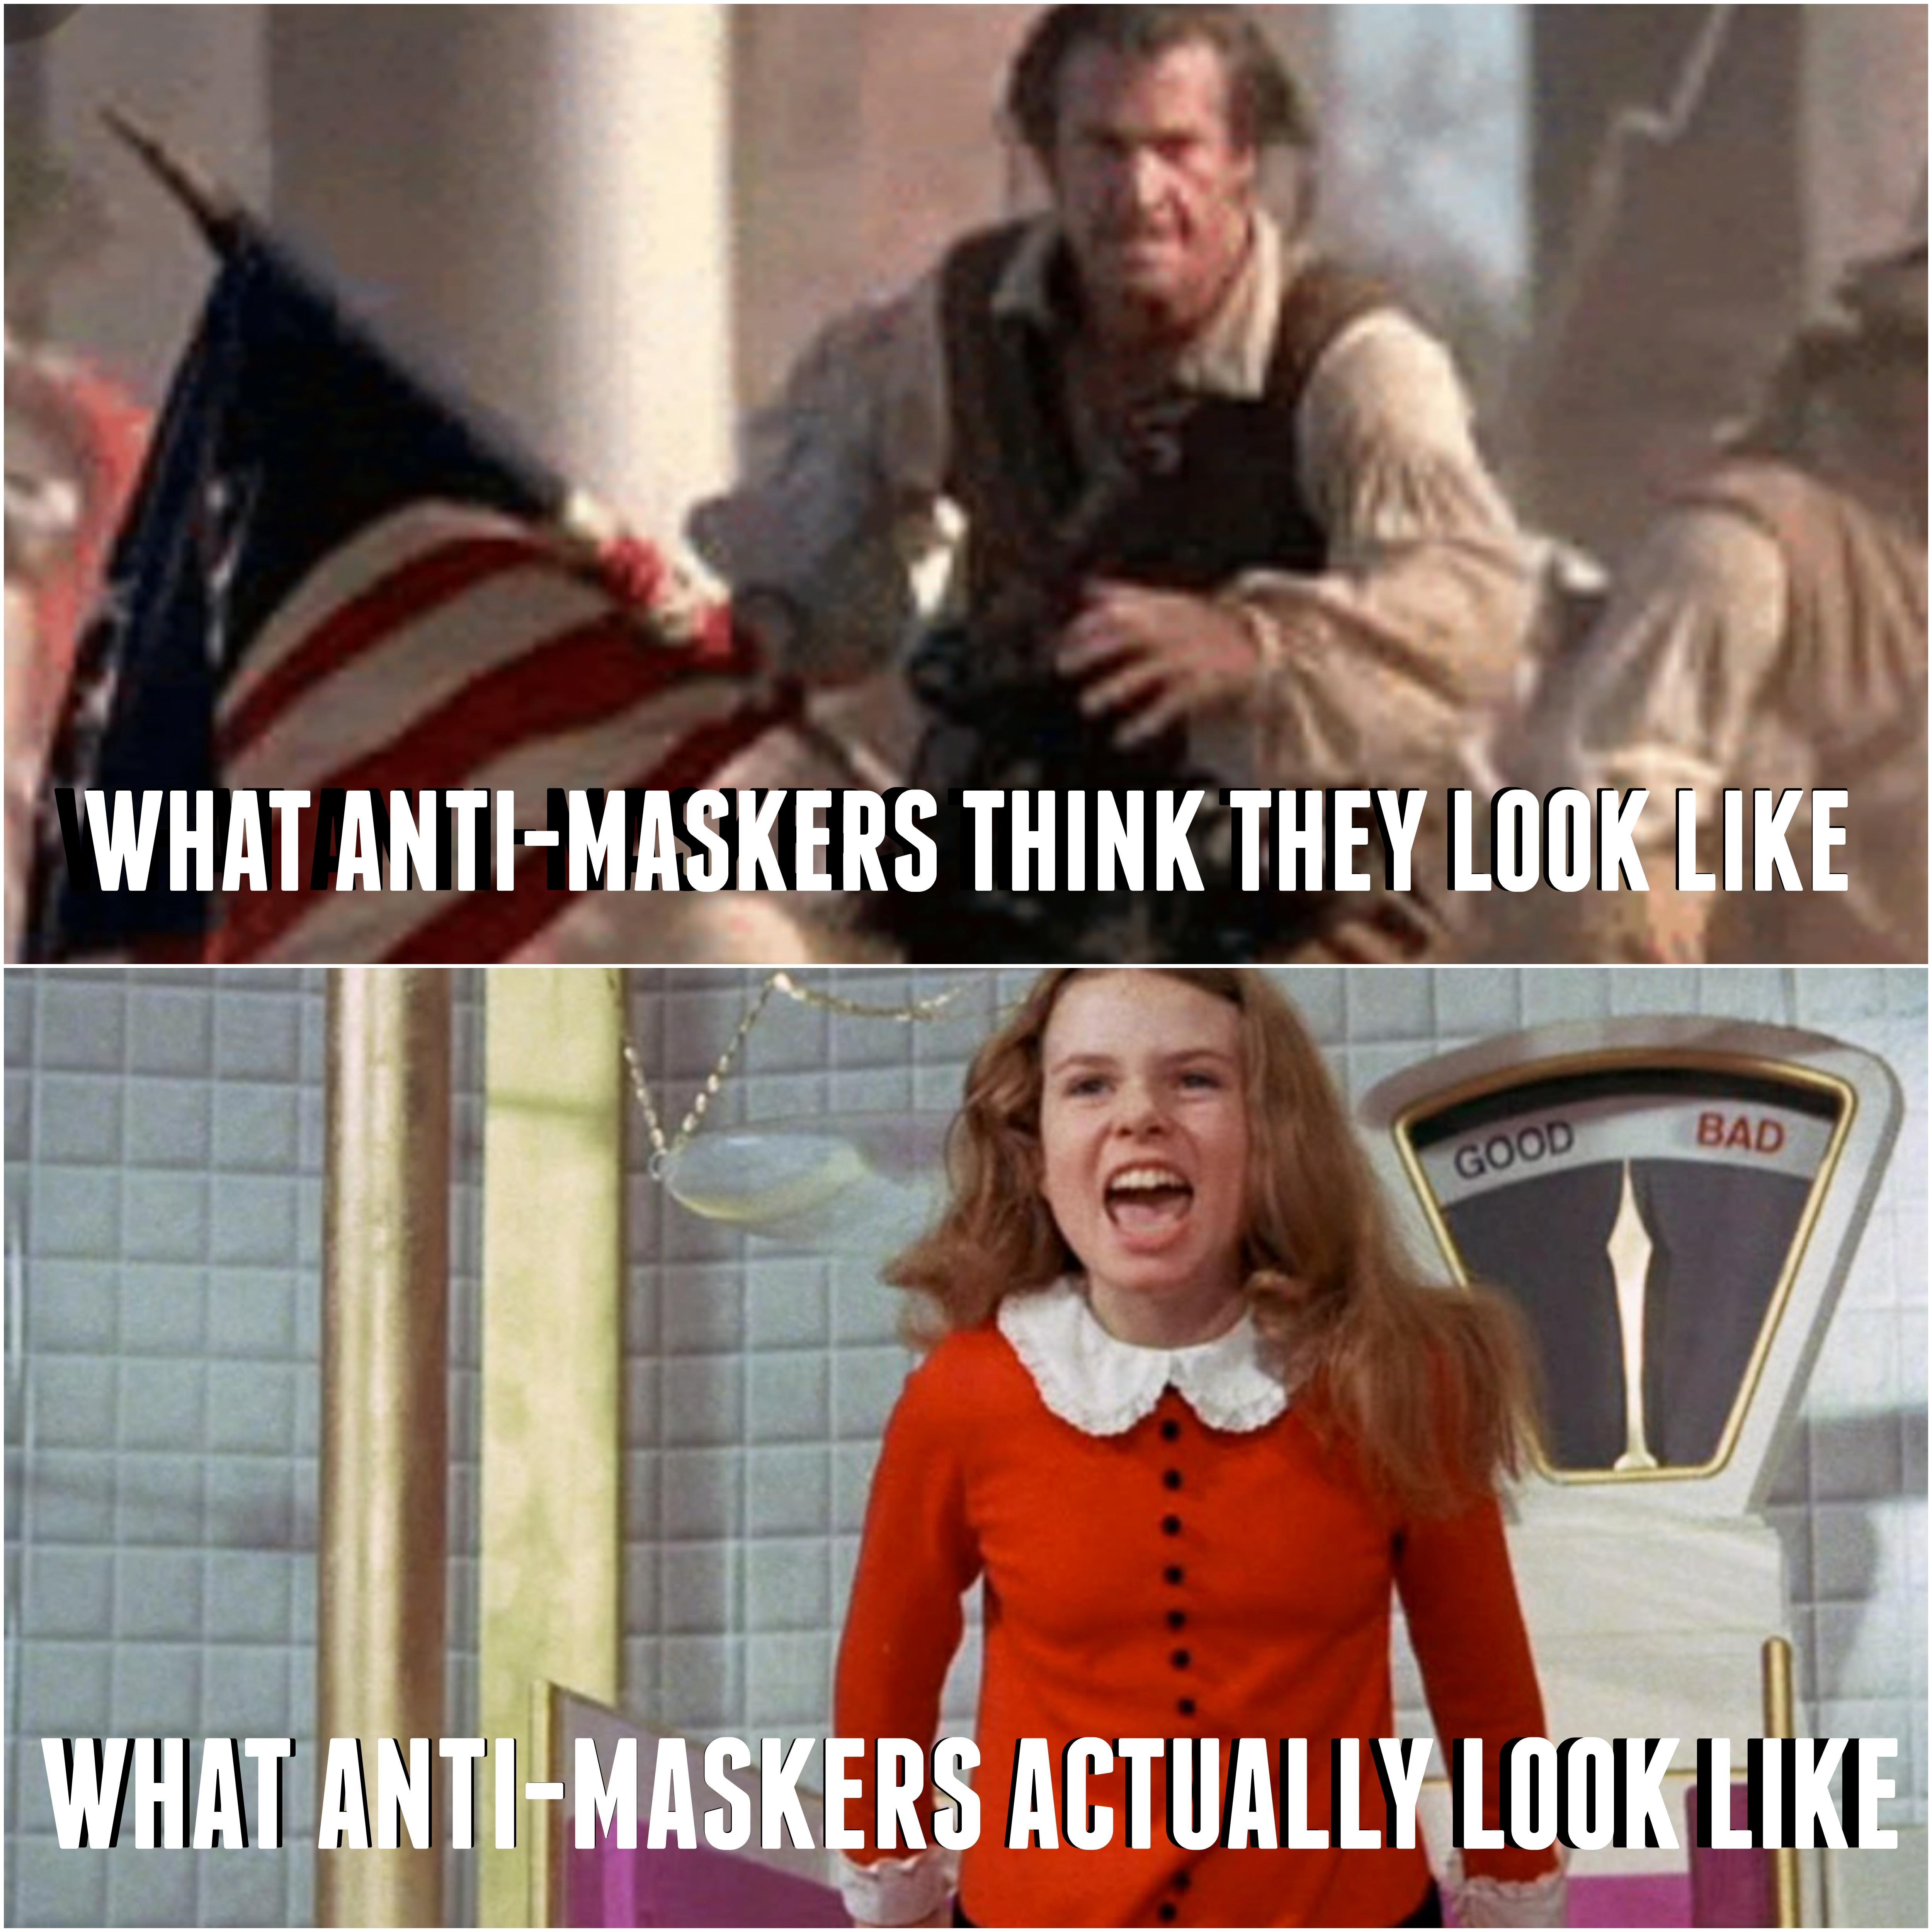 veruca salt - What AntiMaskers Think They Look Good Bad What AntiMaskers Actually Look